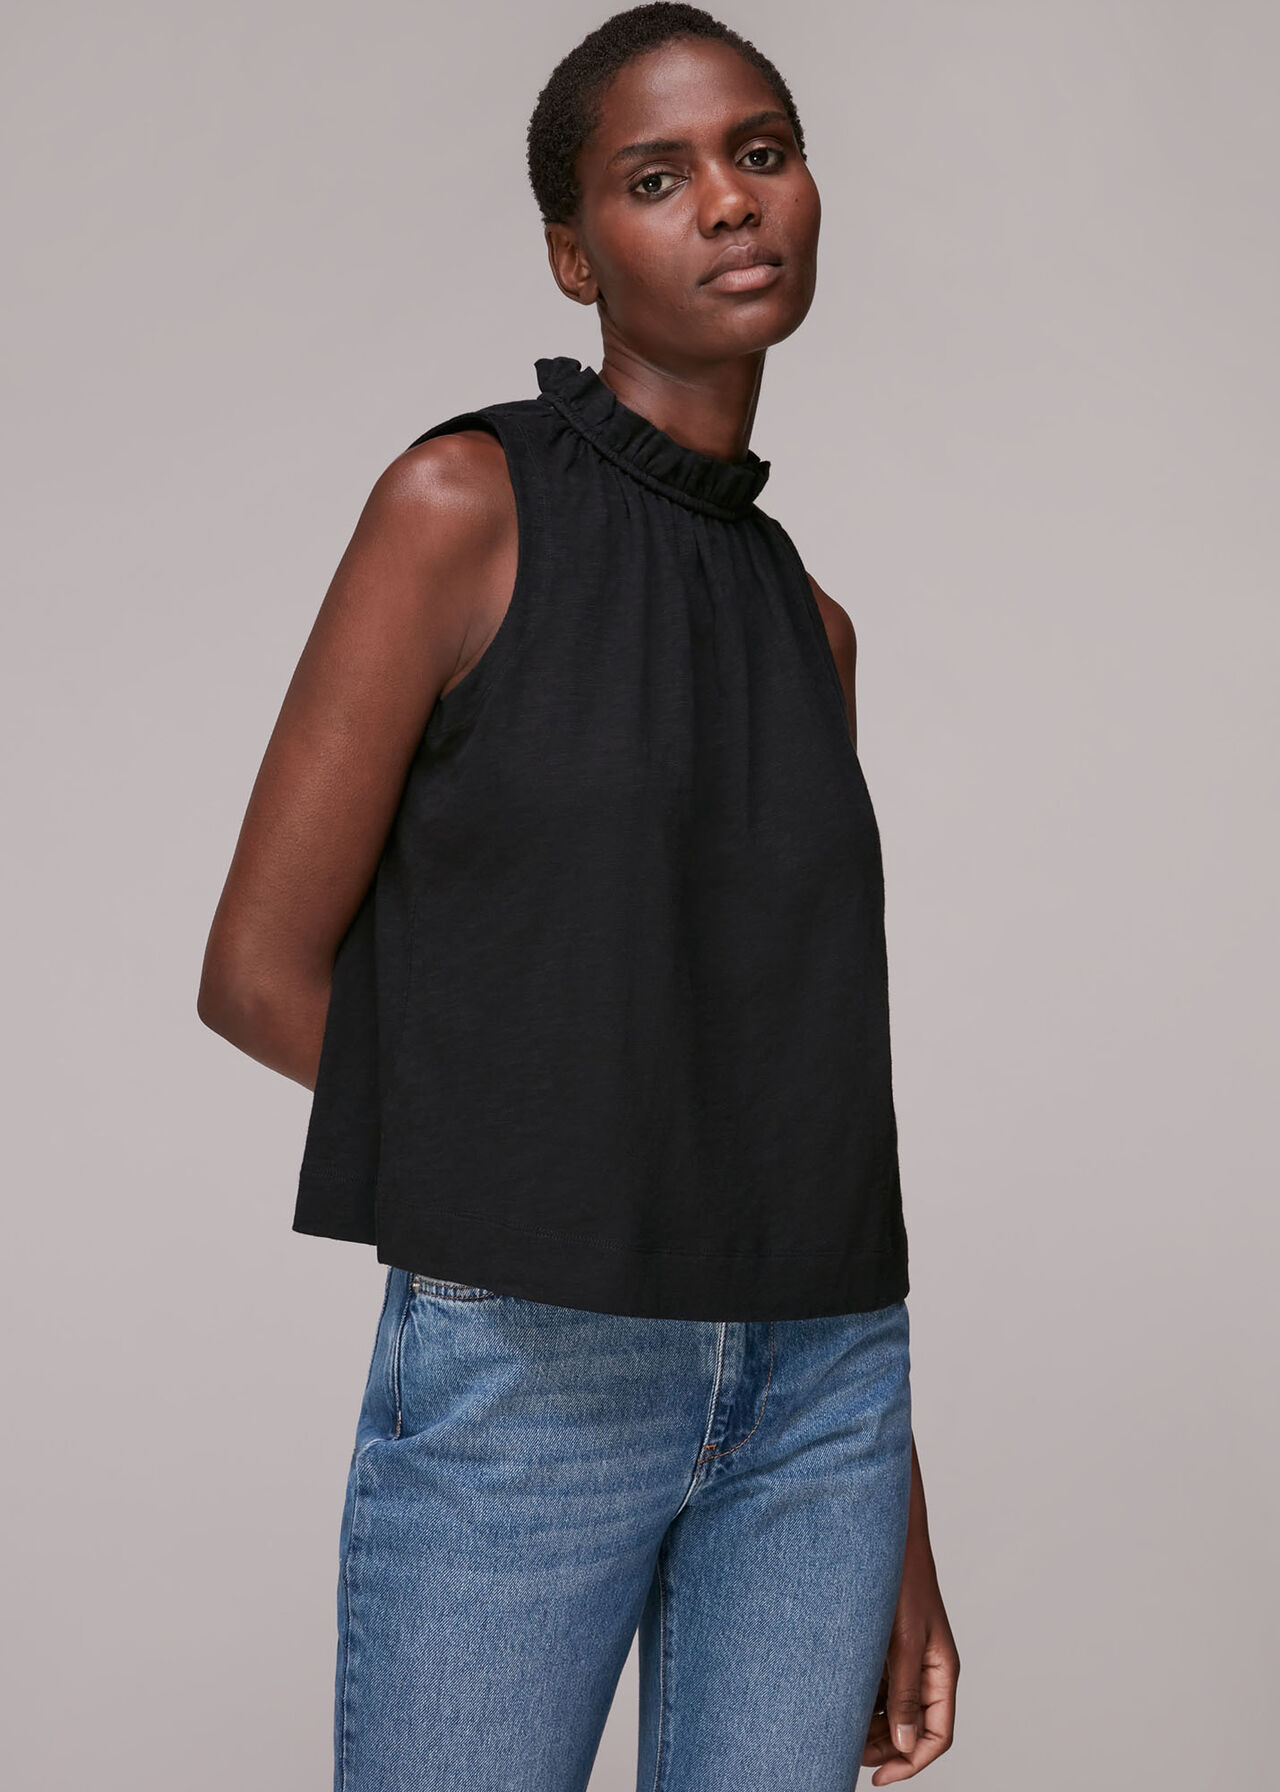 Ruched Neck Sleeveless Top